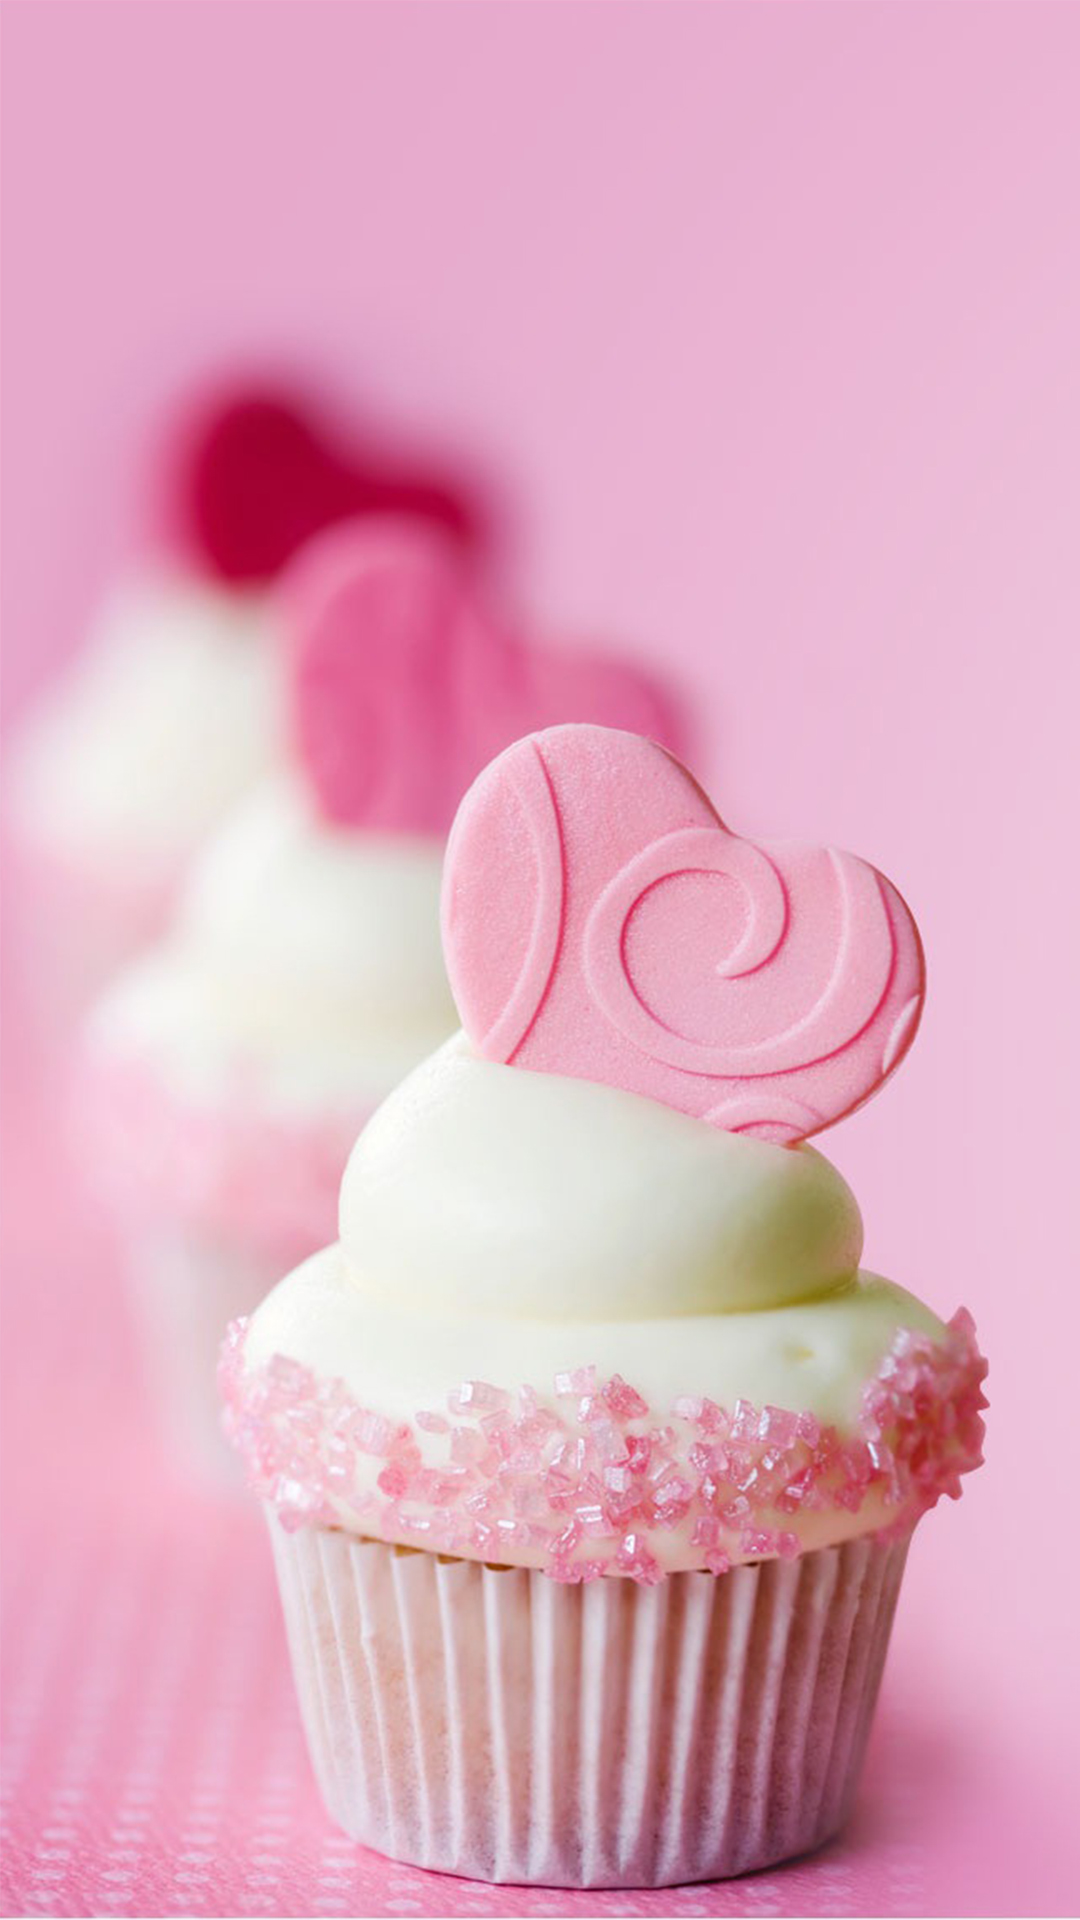 Cupcakes Iphone Wallpapers